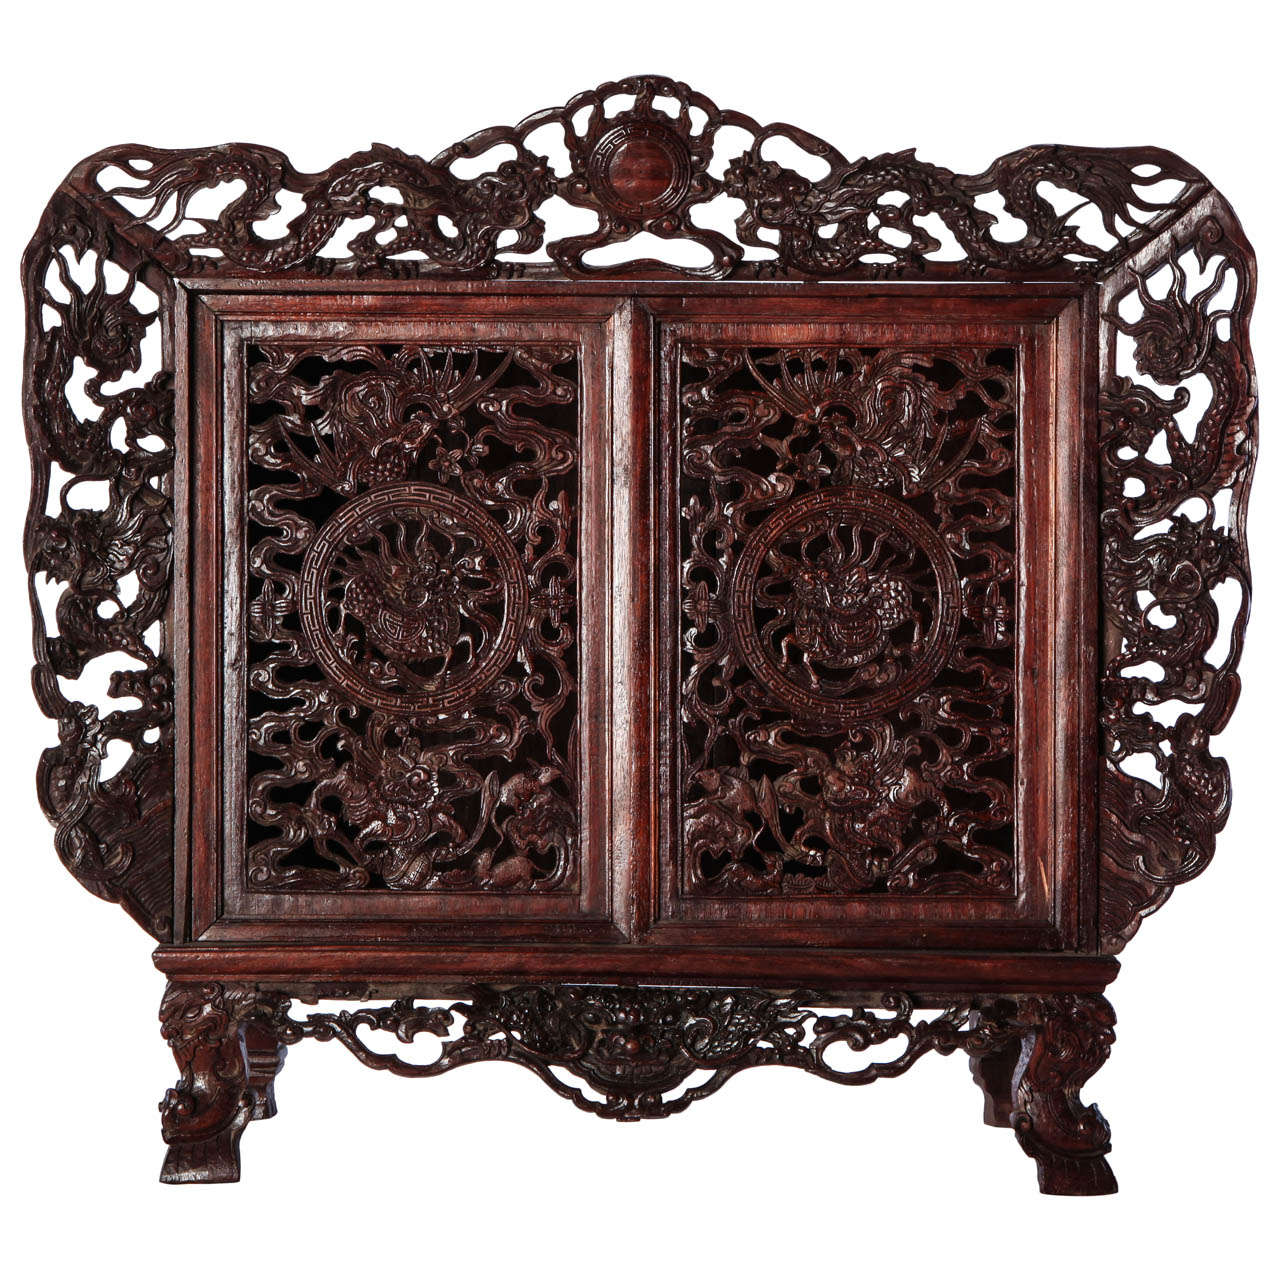 A Chinese  small openwork wood cabinet depicting Dragons